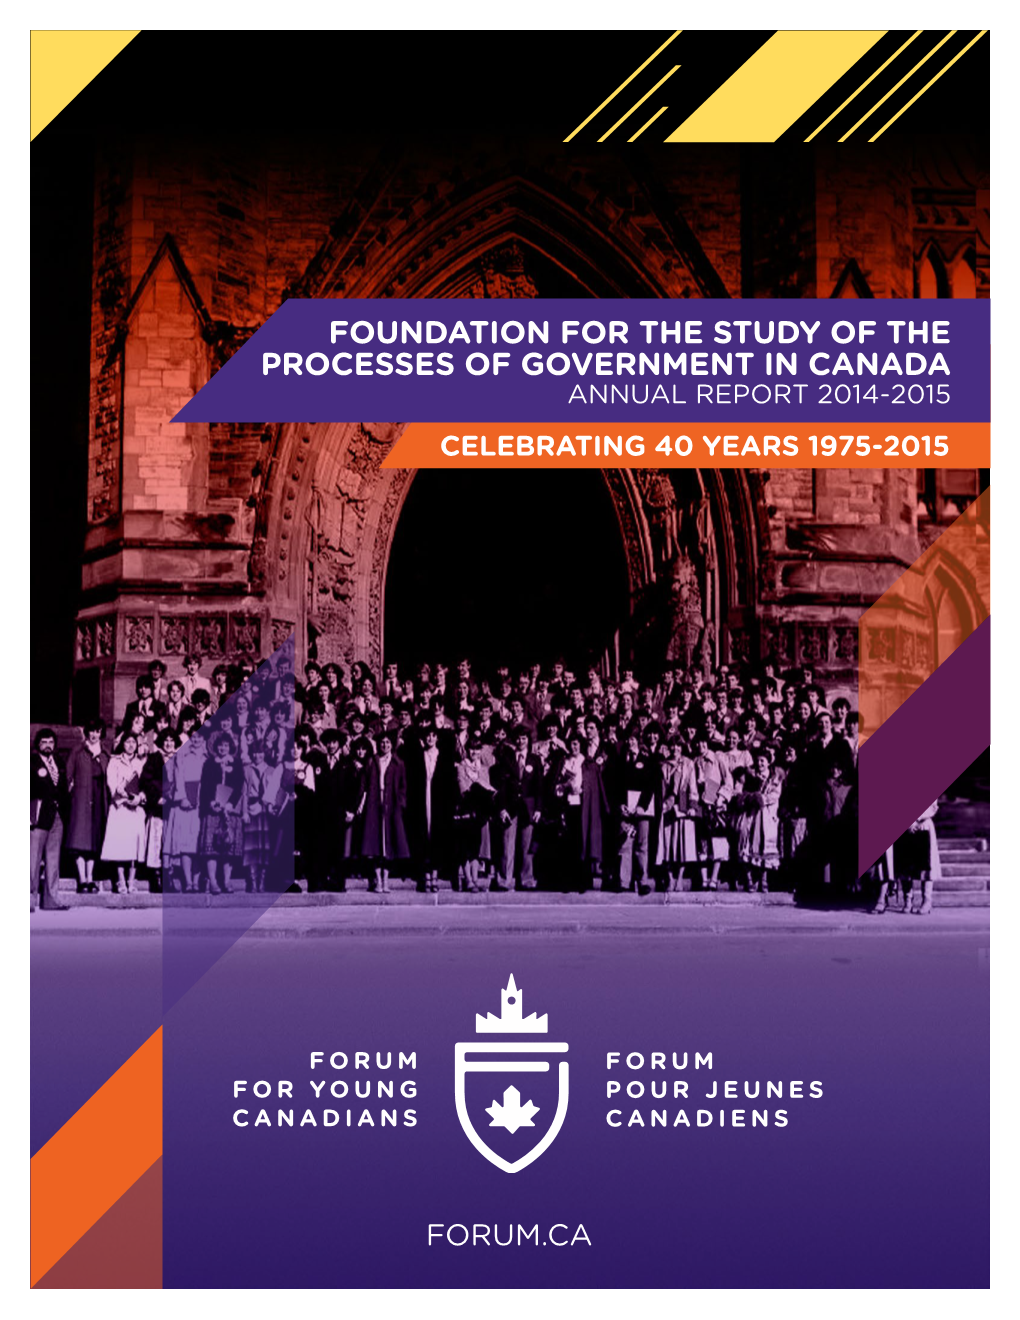 Foundation for the Study of the Processes of Government in Canada Annual Report 2014-2015 Celebrating 40 Years 1975-2015